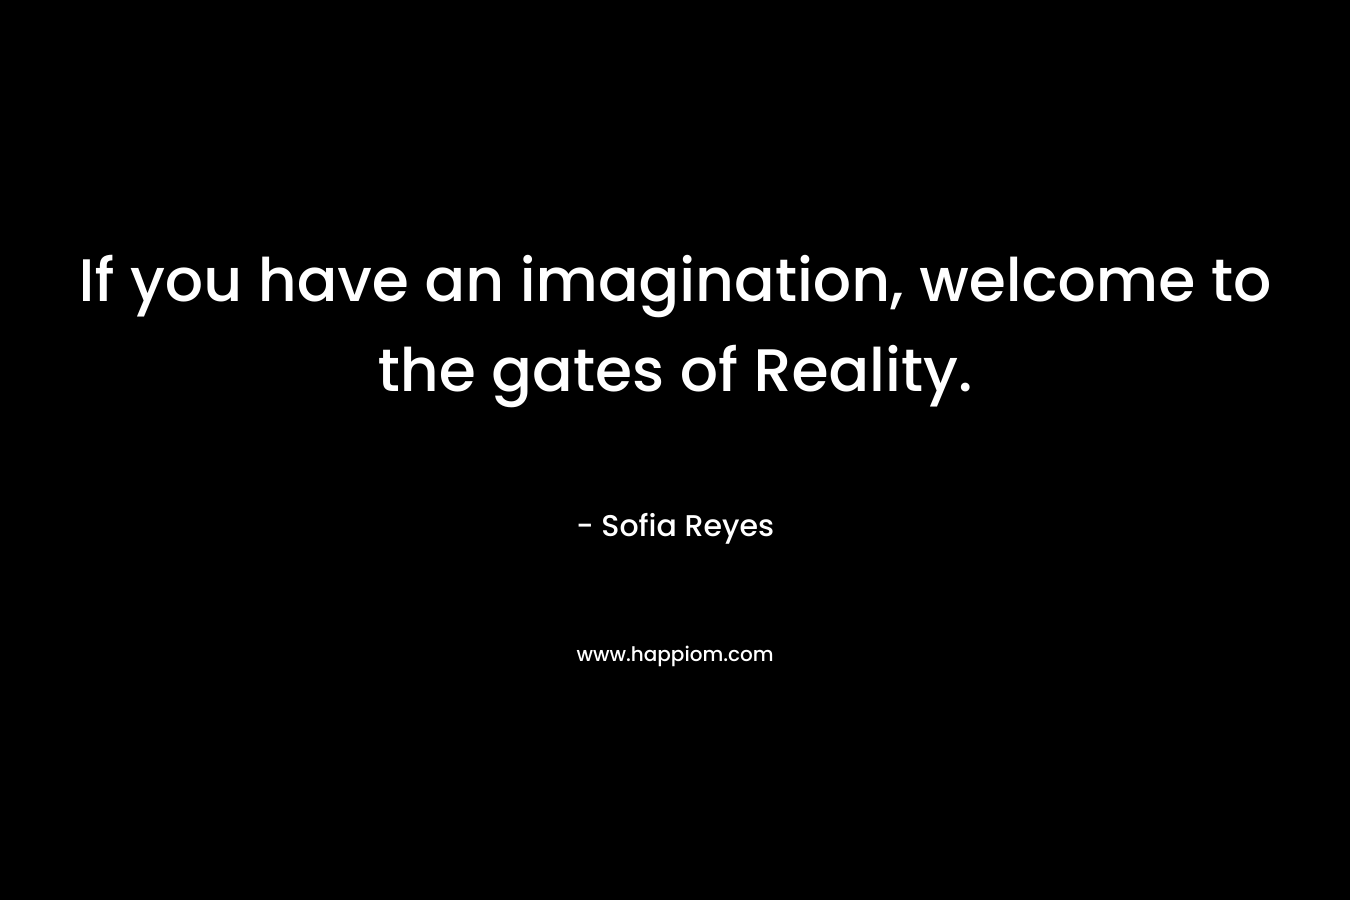 If you have an imagination, welcome to the gates of Reality. – Sofia Reyes